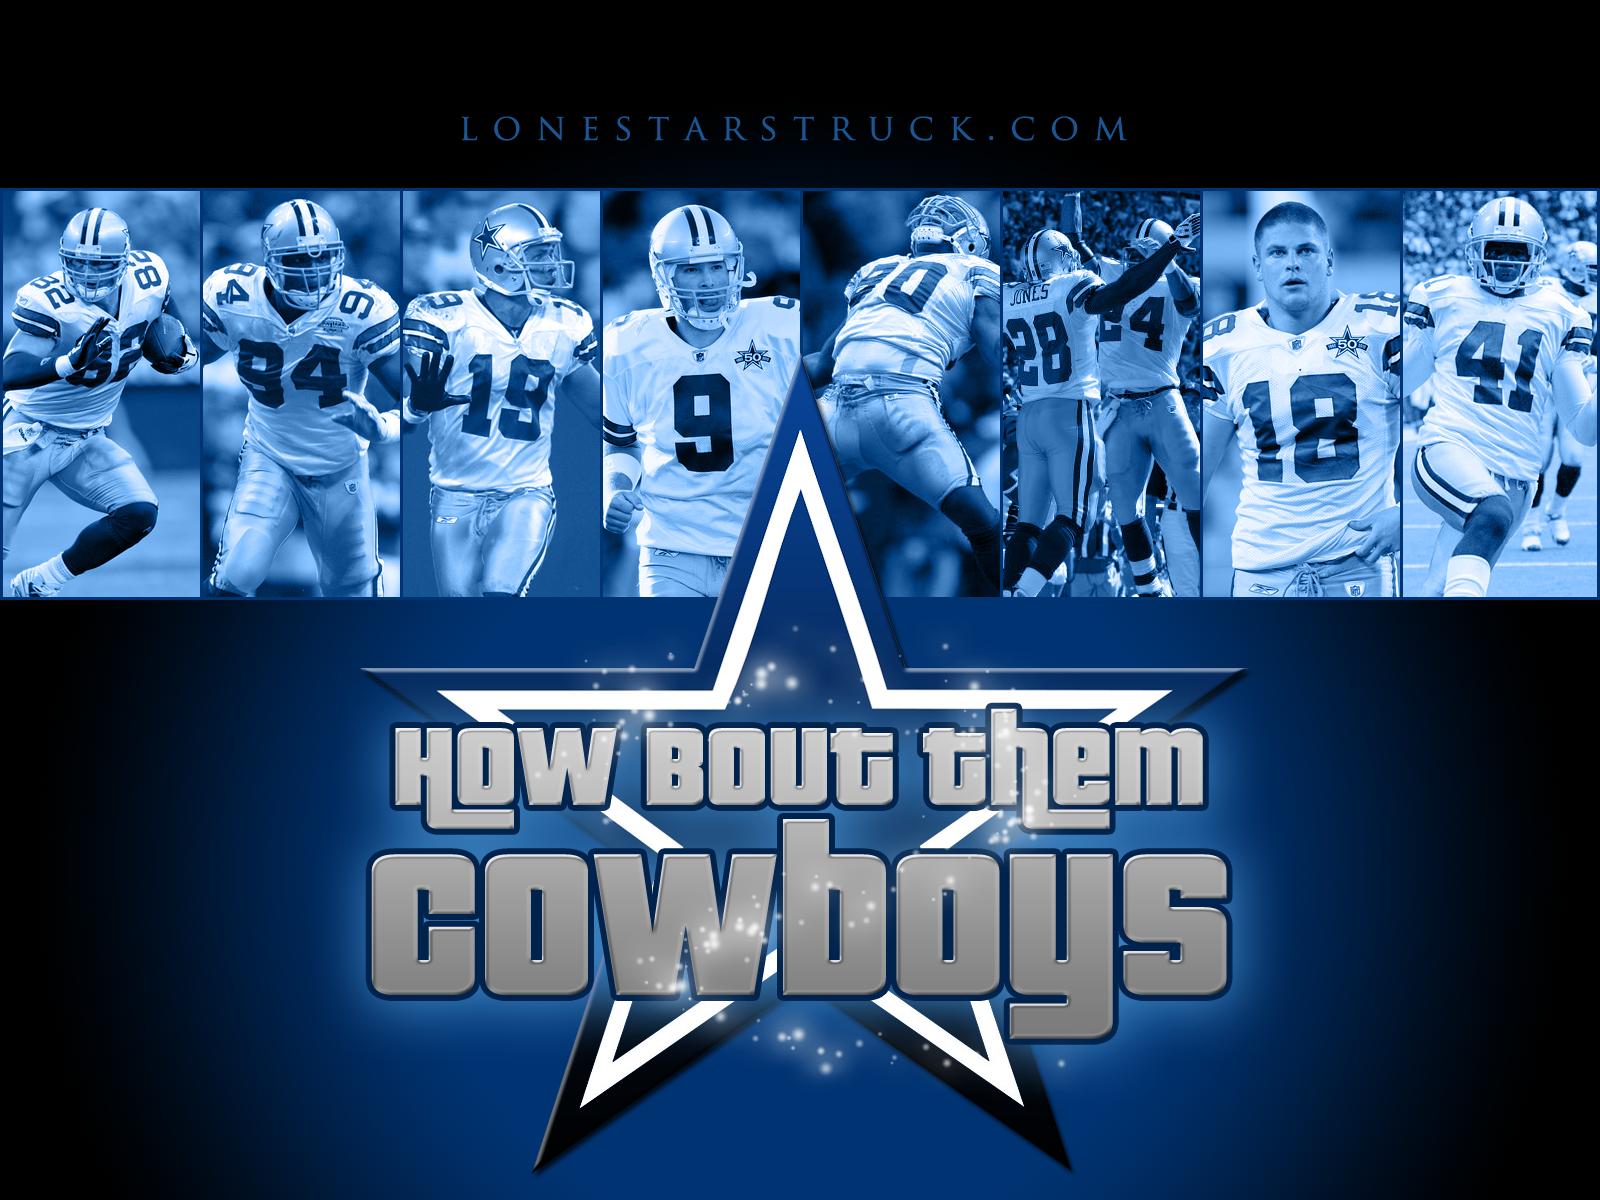 Hope you like this Dallas Cowboys background in high resolution as